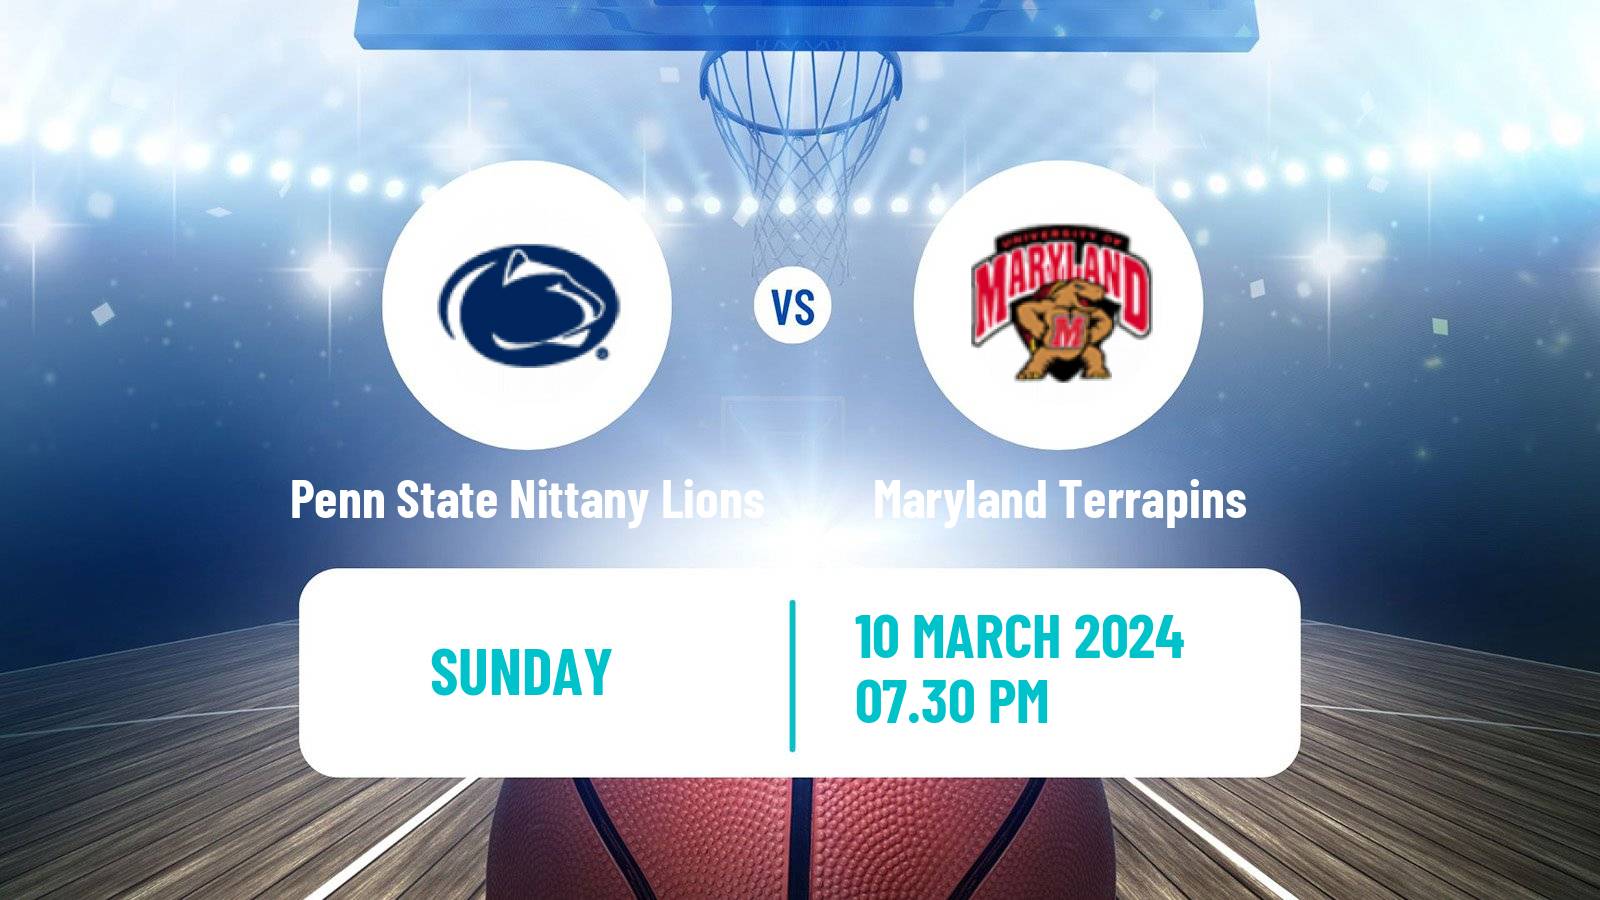 Basketball NCAA College Basketball Penn State Nittany Lions - Maryland Terrapins